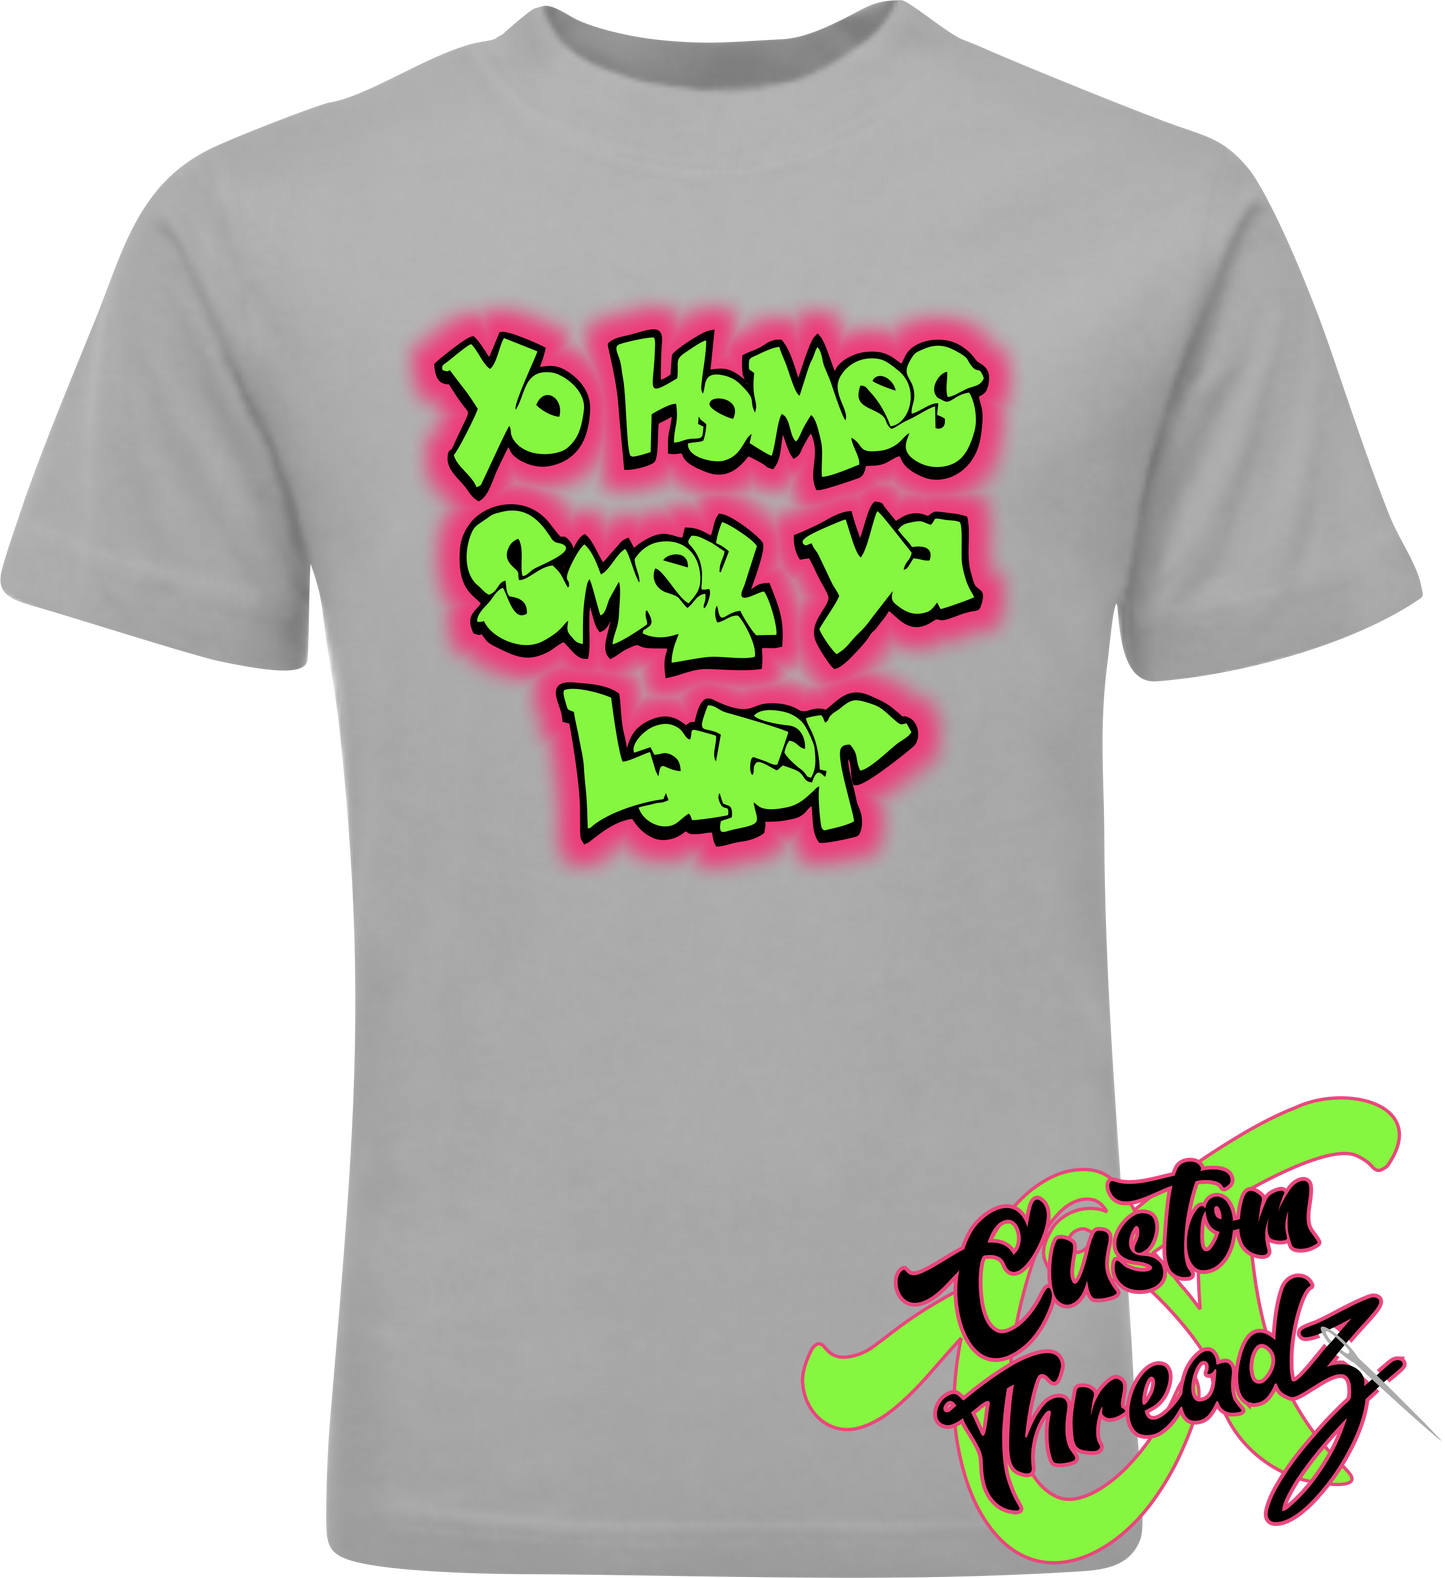 silver youth tee with yo homes smell ya later fresh prince of bel air DTG printed design